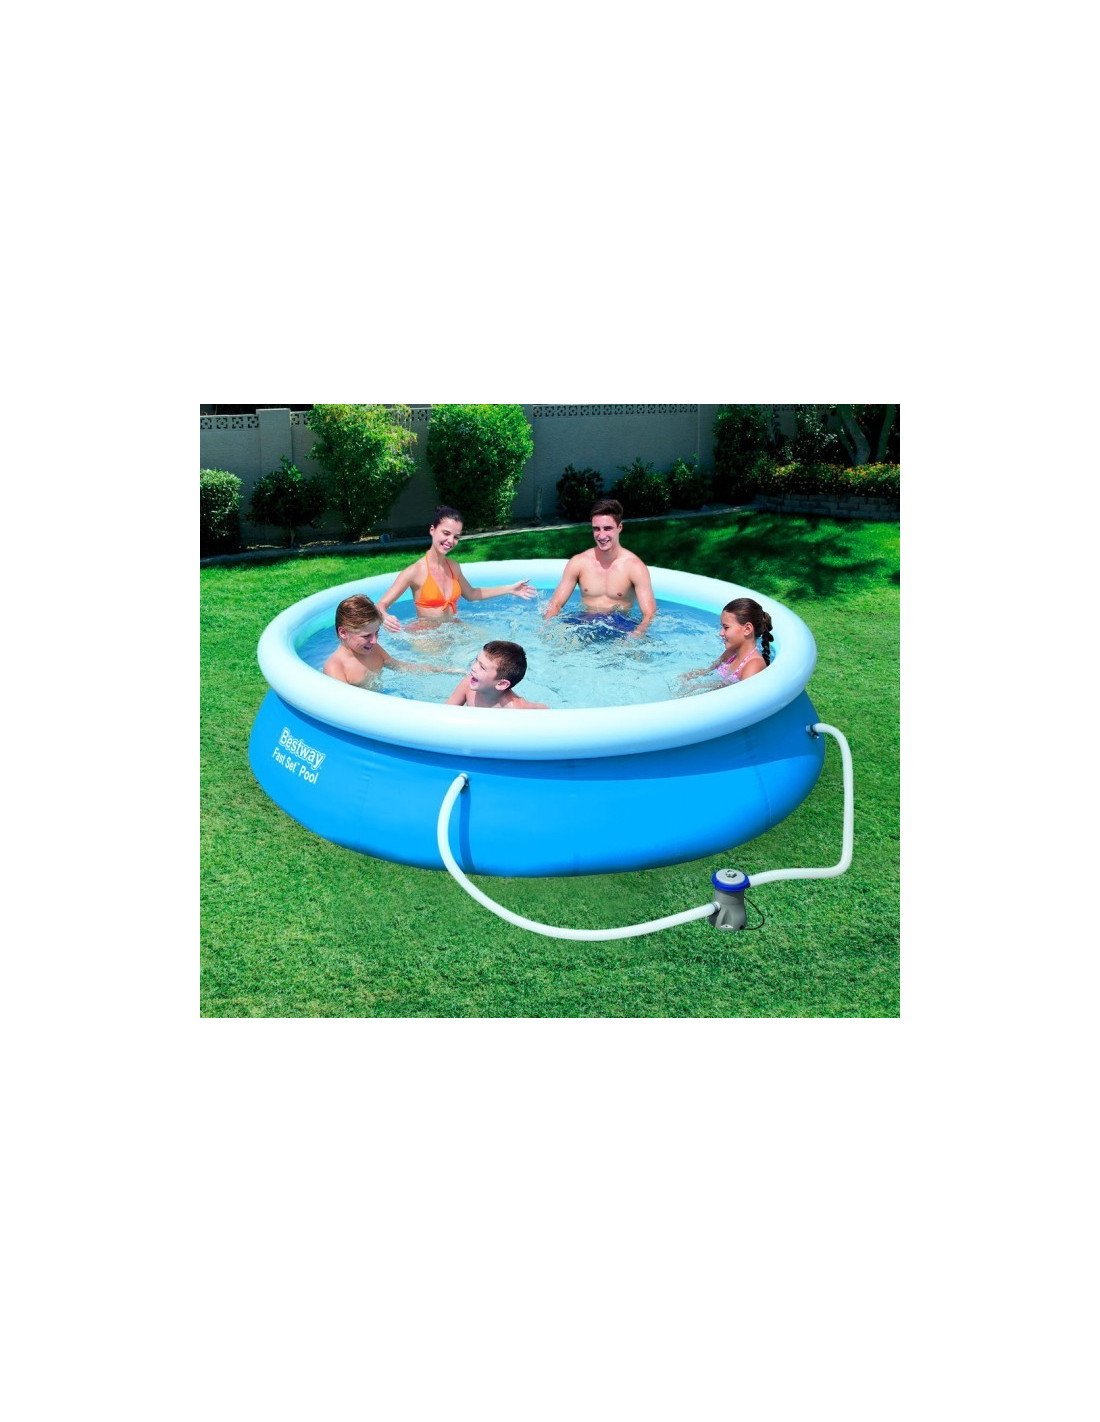 piscine gonflable 305x76